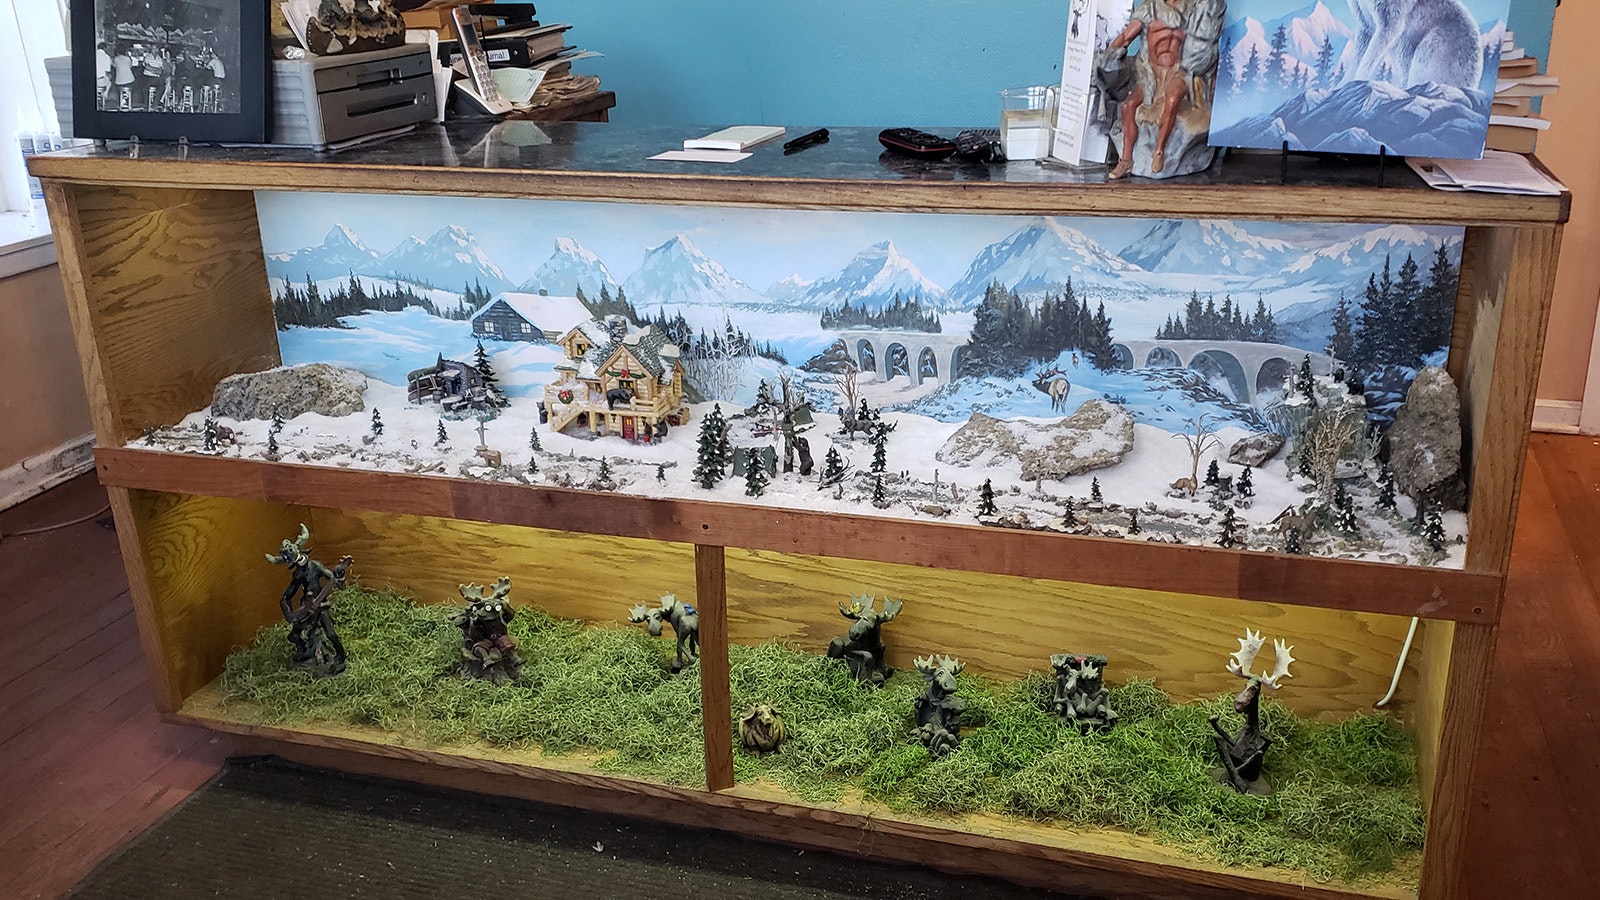 The front counter includes a picture of Tracy Carotta's parents' old bar top, left, as well as dioramas that show a snowy scene with several miniature scroungy moose figurines. Below that are moose statues in goofy poses.